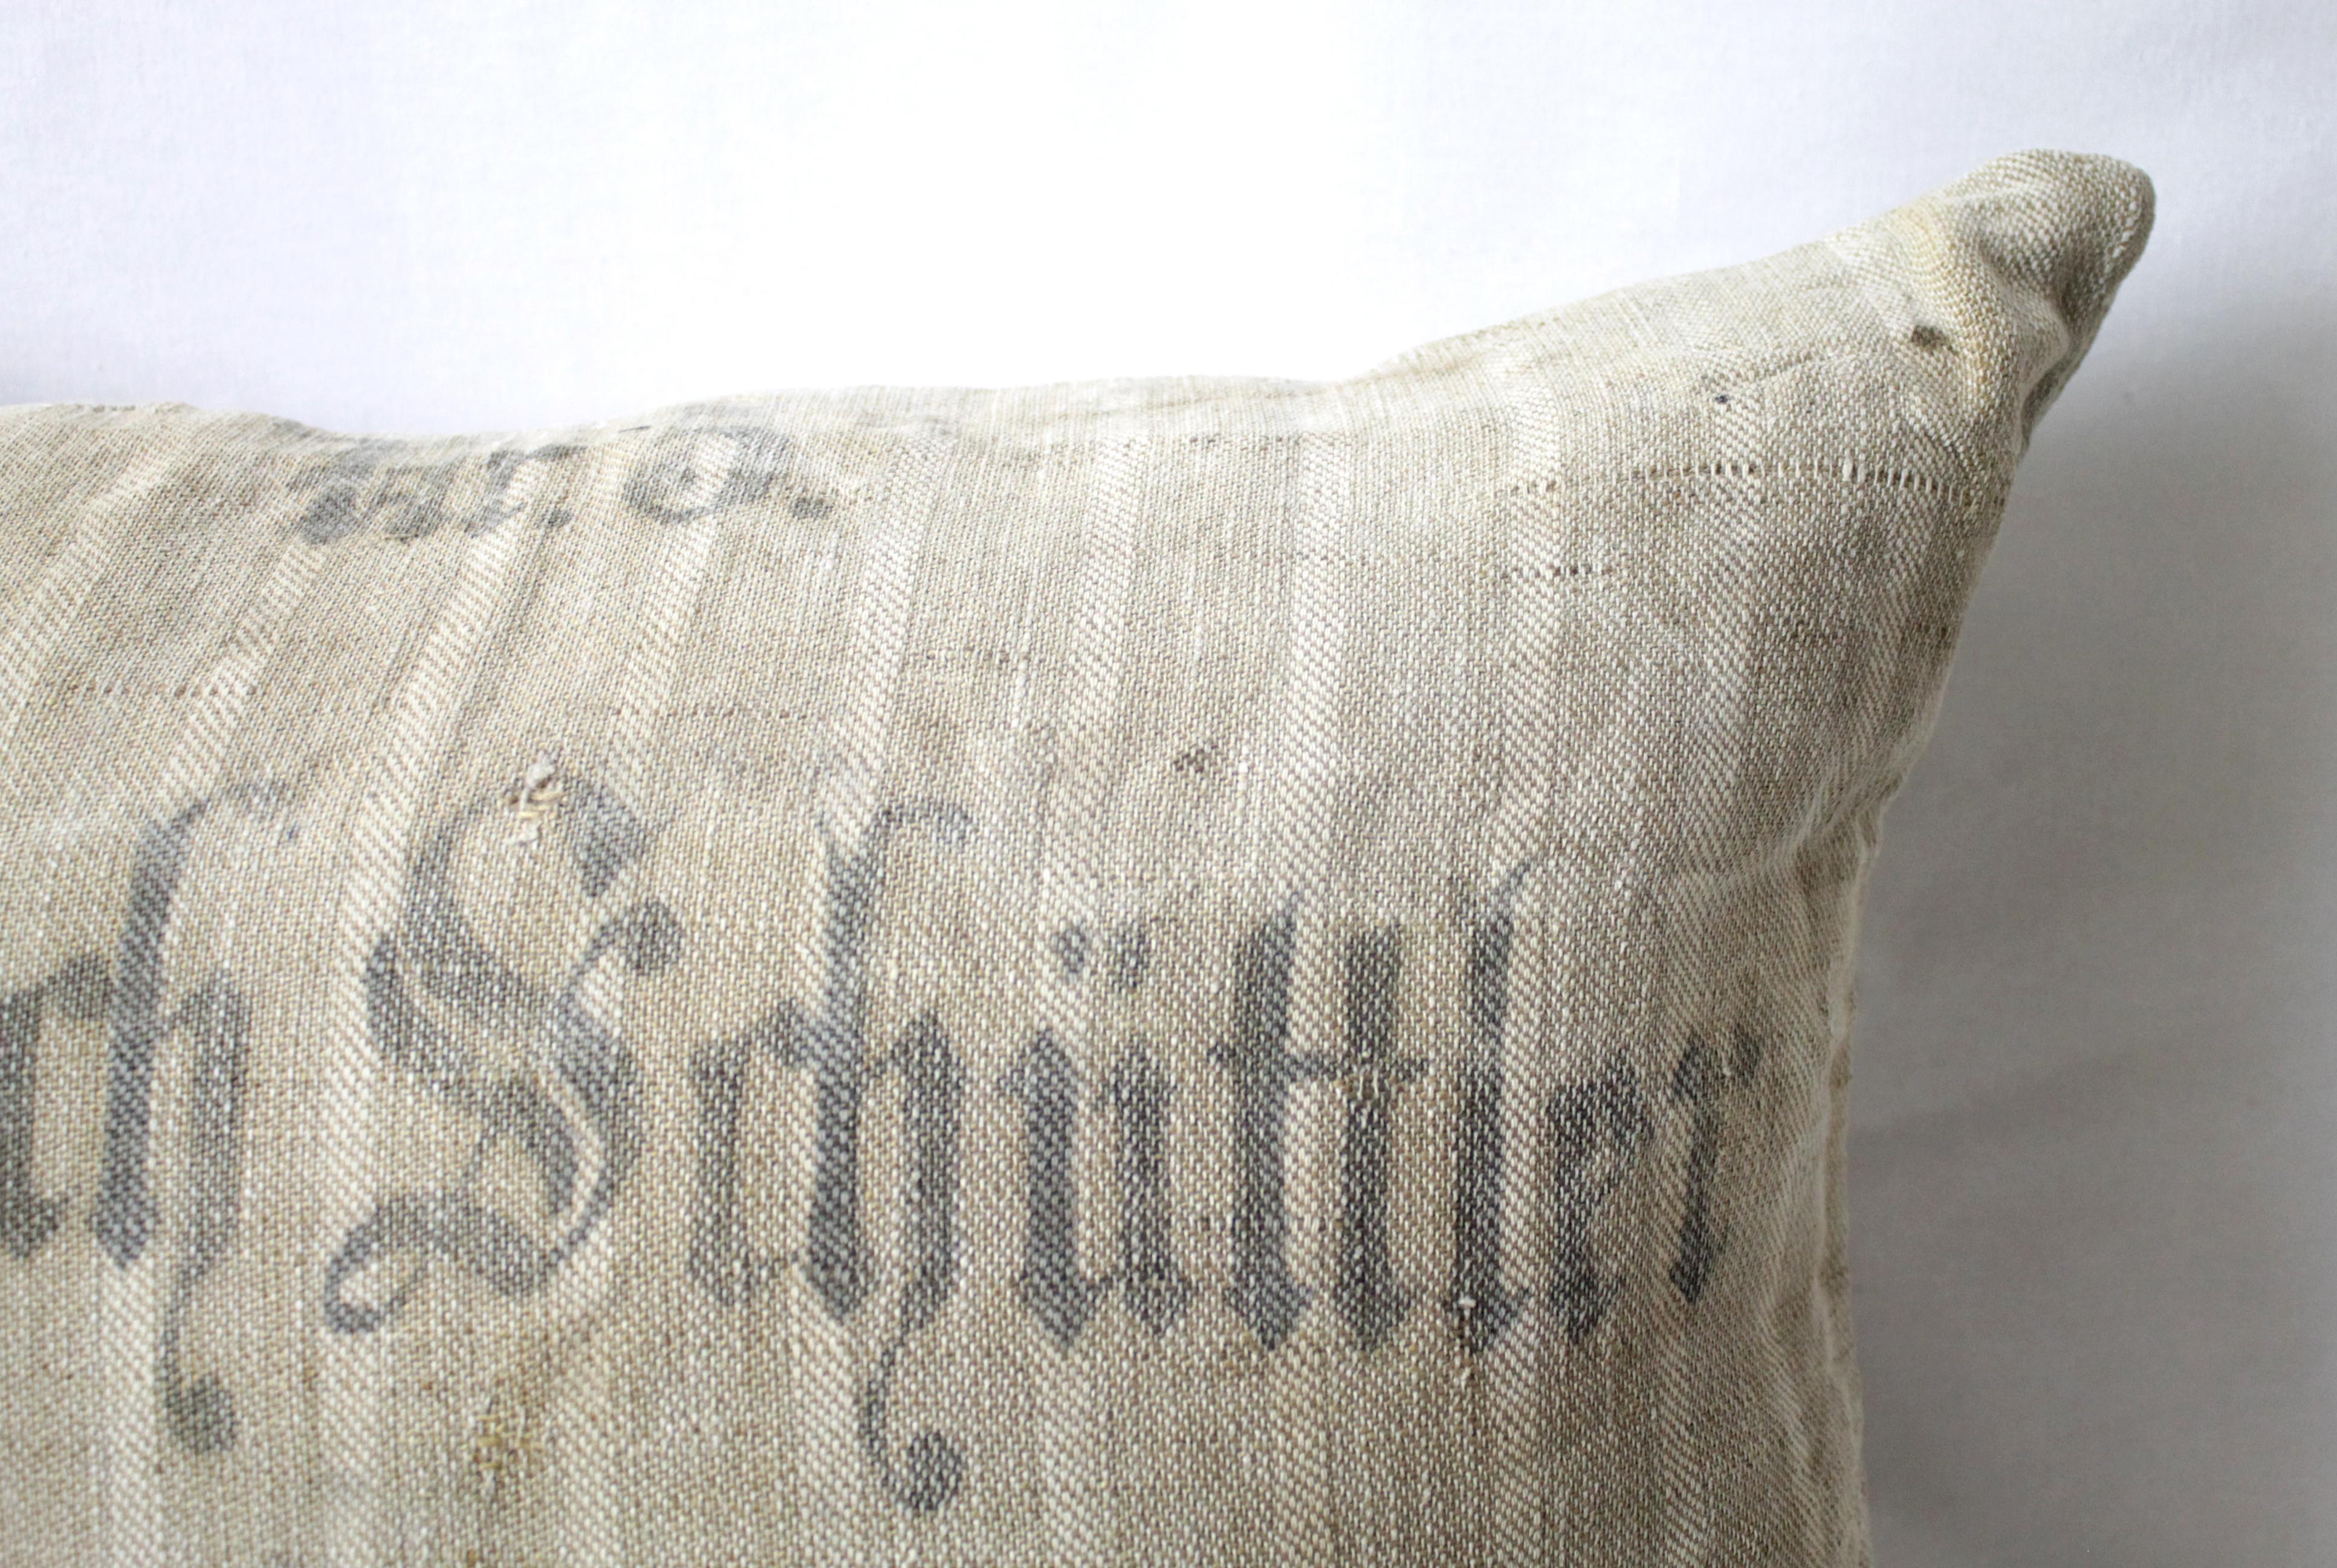 Original Antique Printed German Stripe Feed Sack Pillow In Distressed Condition For Sale In Brea, CA